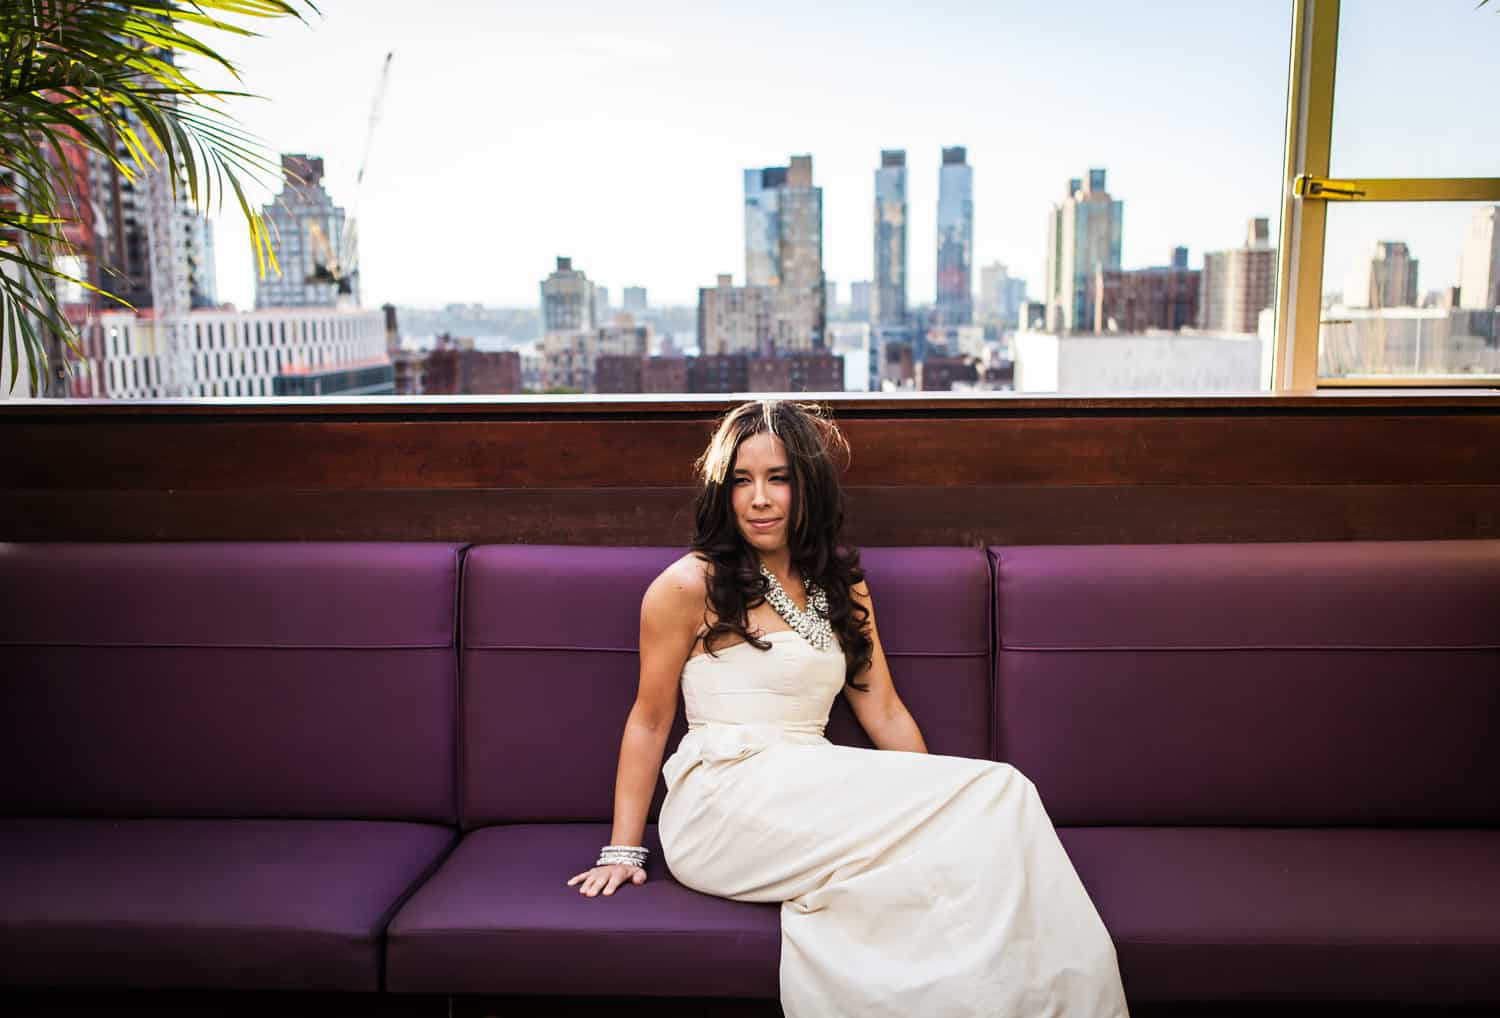 Bride sitting on bench with view of Upper West Side in background